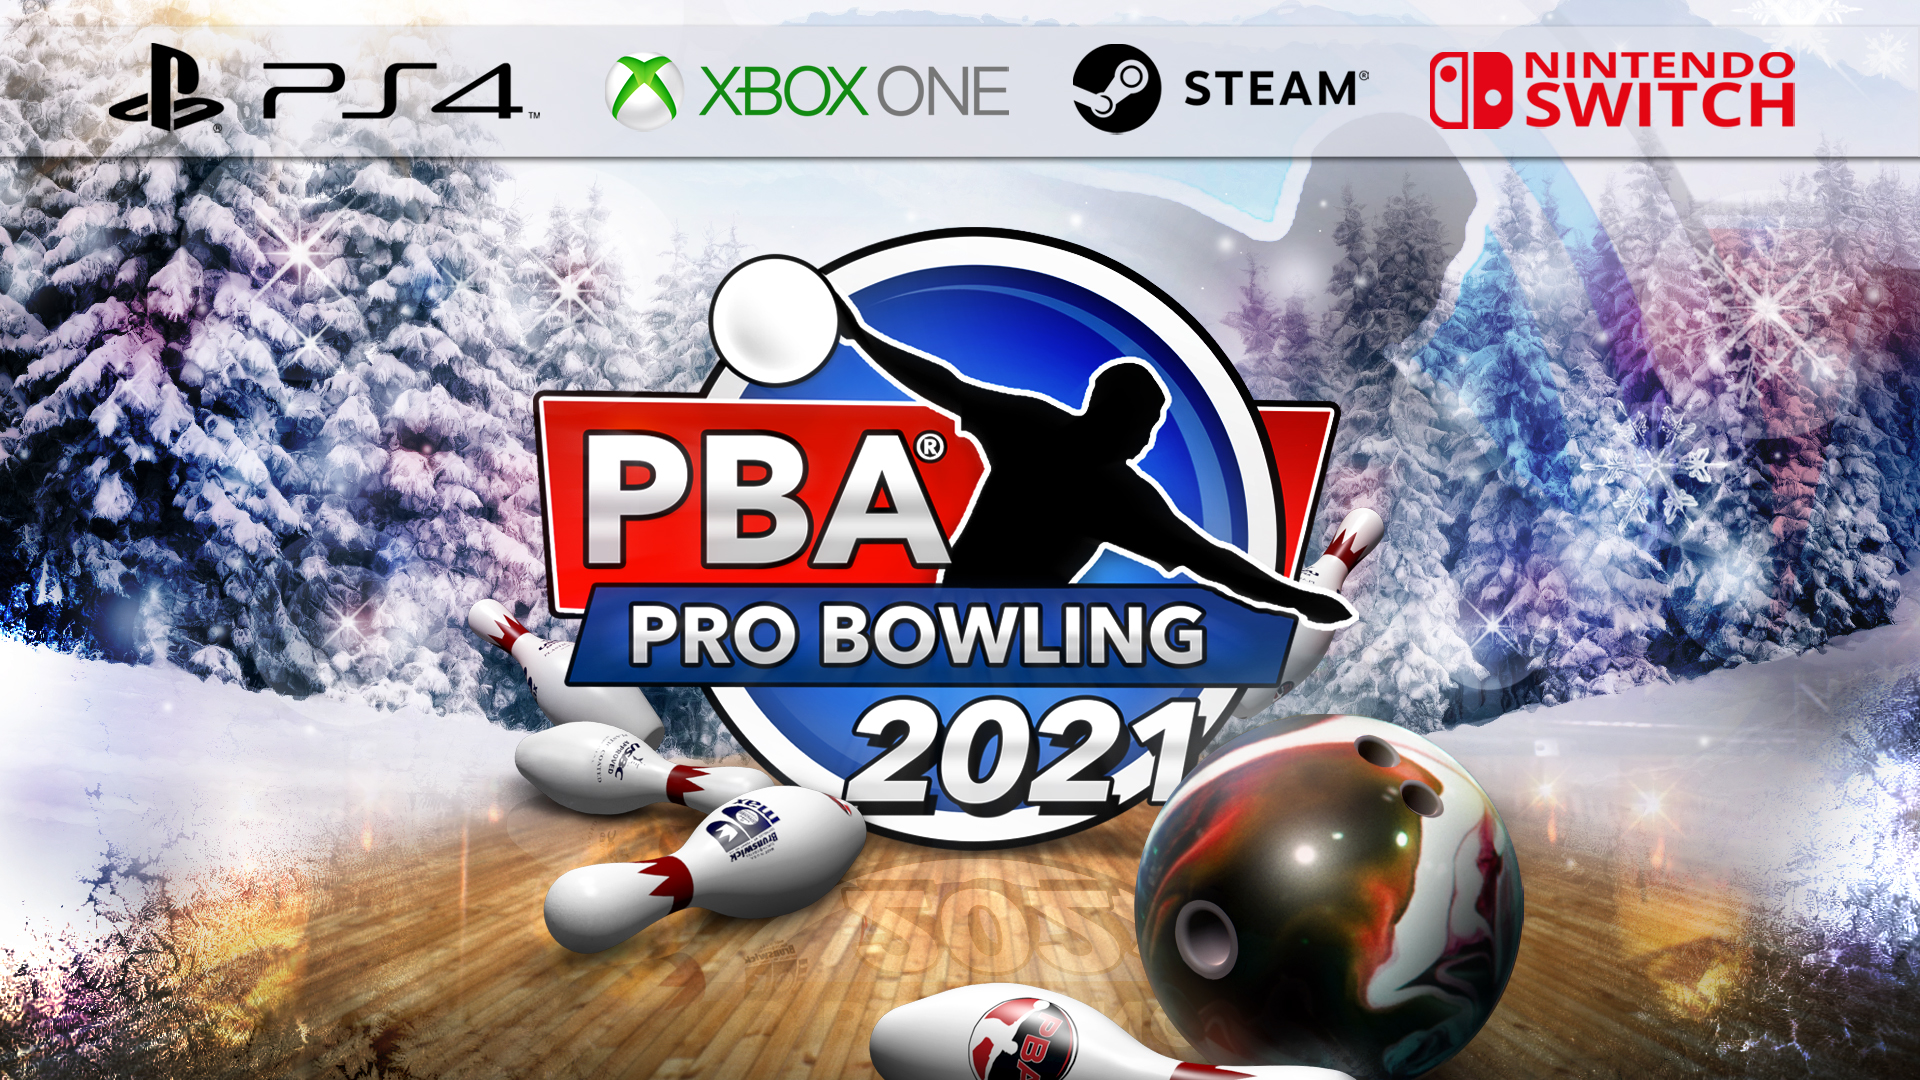 PBA Pro Bowling 2023 on Twitter: "PBA Pro Bowling is perfect on PS4, One, &amp; Switch. https://t.co/uvpAP0uXwq" / Twitter